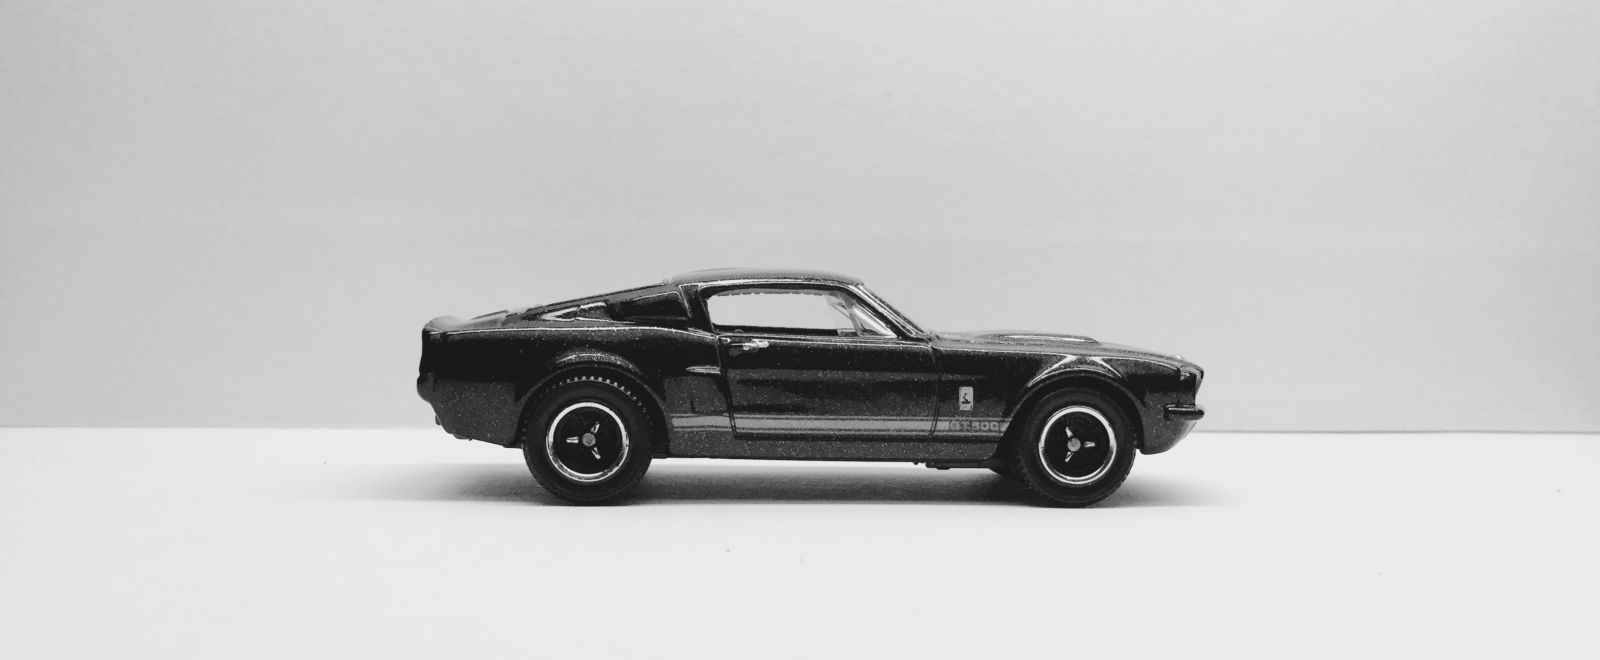 Illustration for article titled Wheelswapped Mustangs... And something else